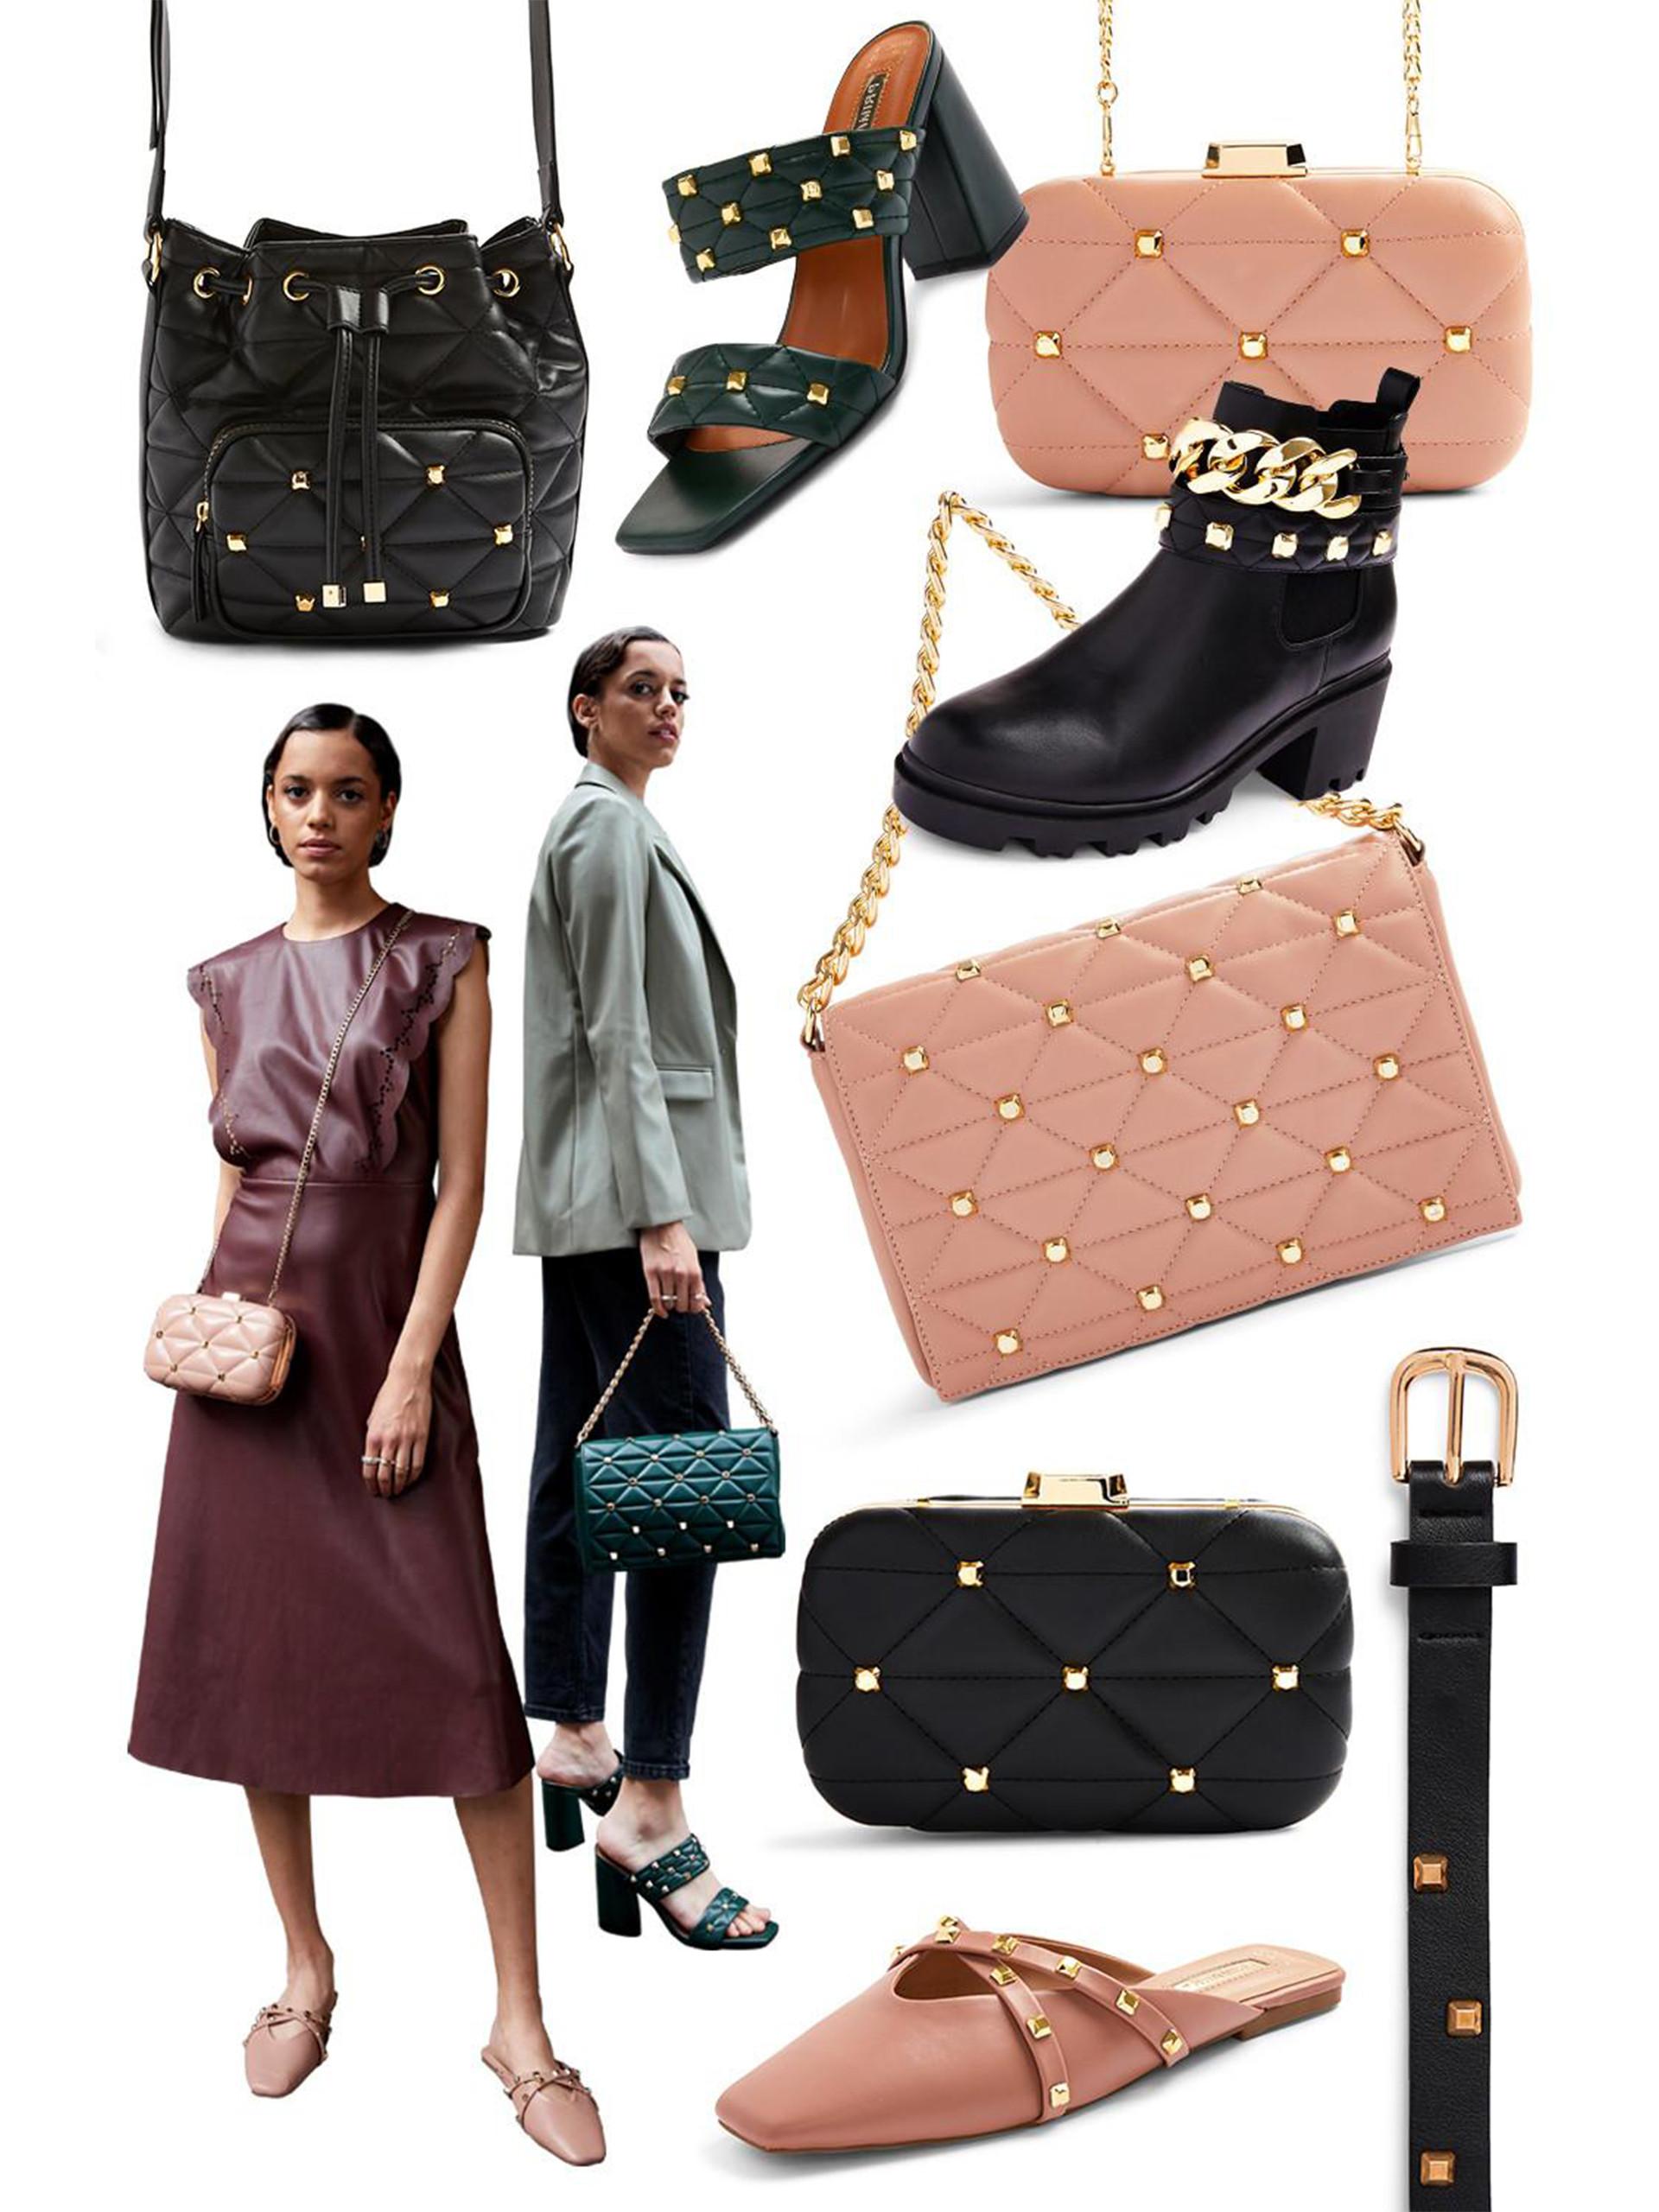 Studded Shoes, Bags and Accessories